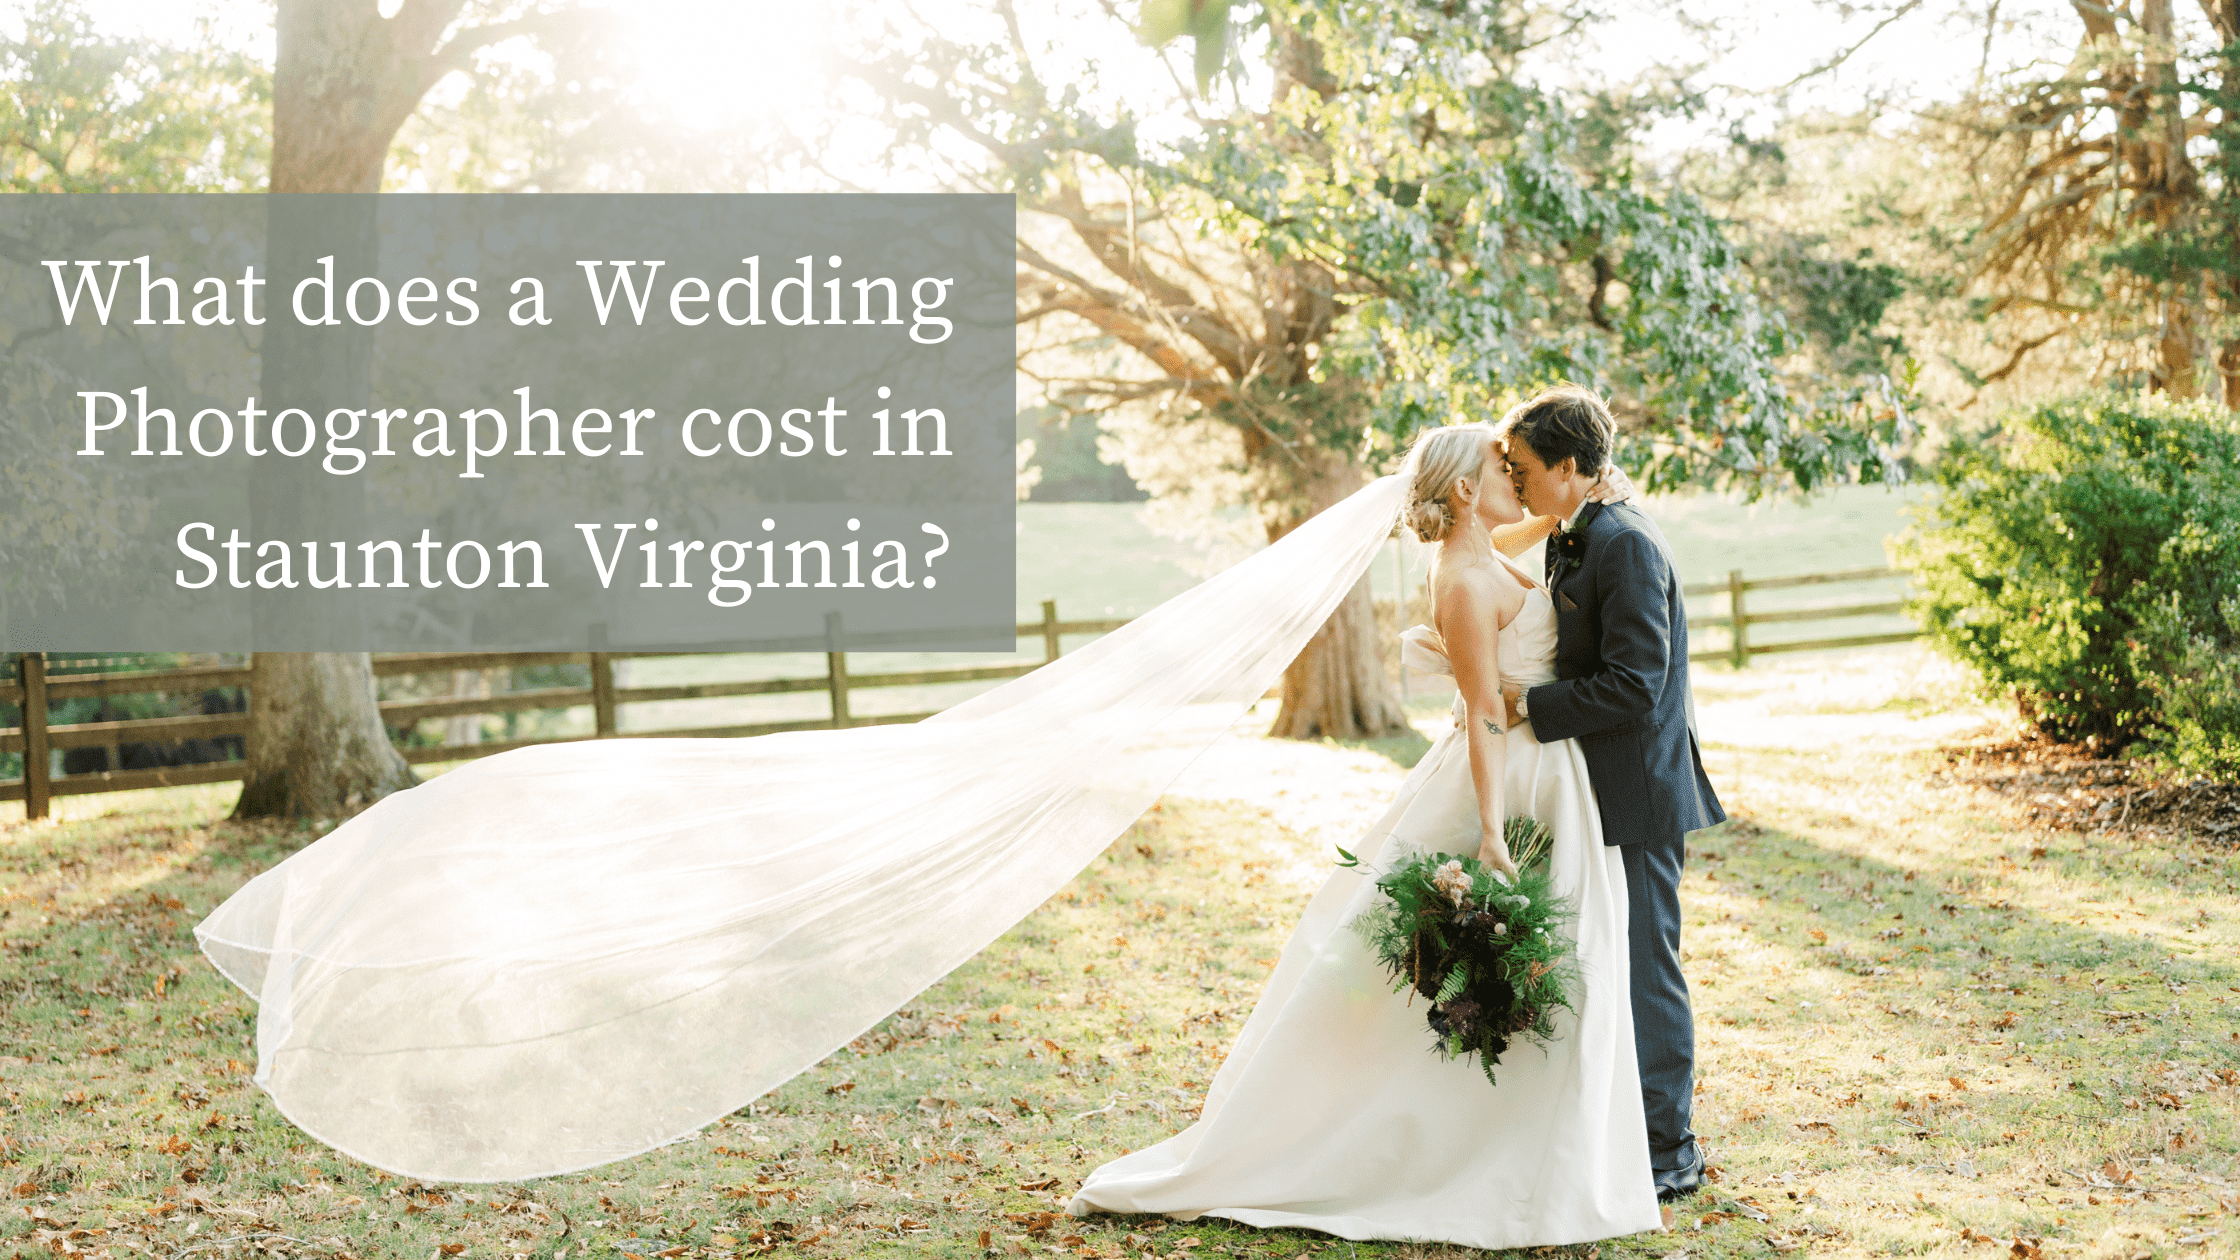 Wedding portrait featuring the sun setting behind the couple. The groom is holding his bride while her long veil flows in the wind. Text on top of the image reads: "What does a wedding photographer cost in Staunton Virginia?"